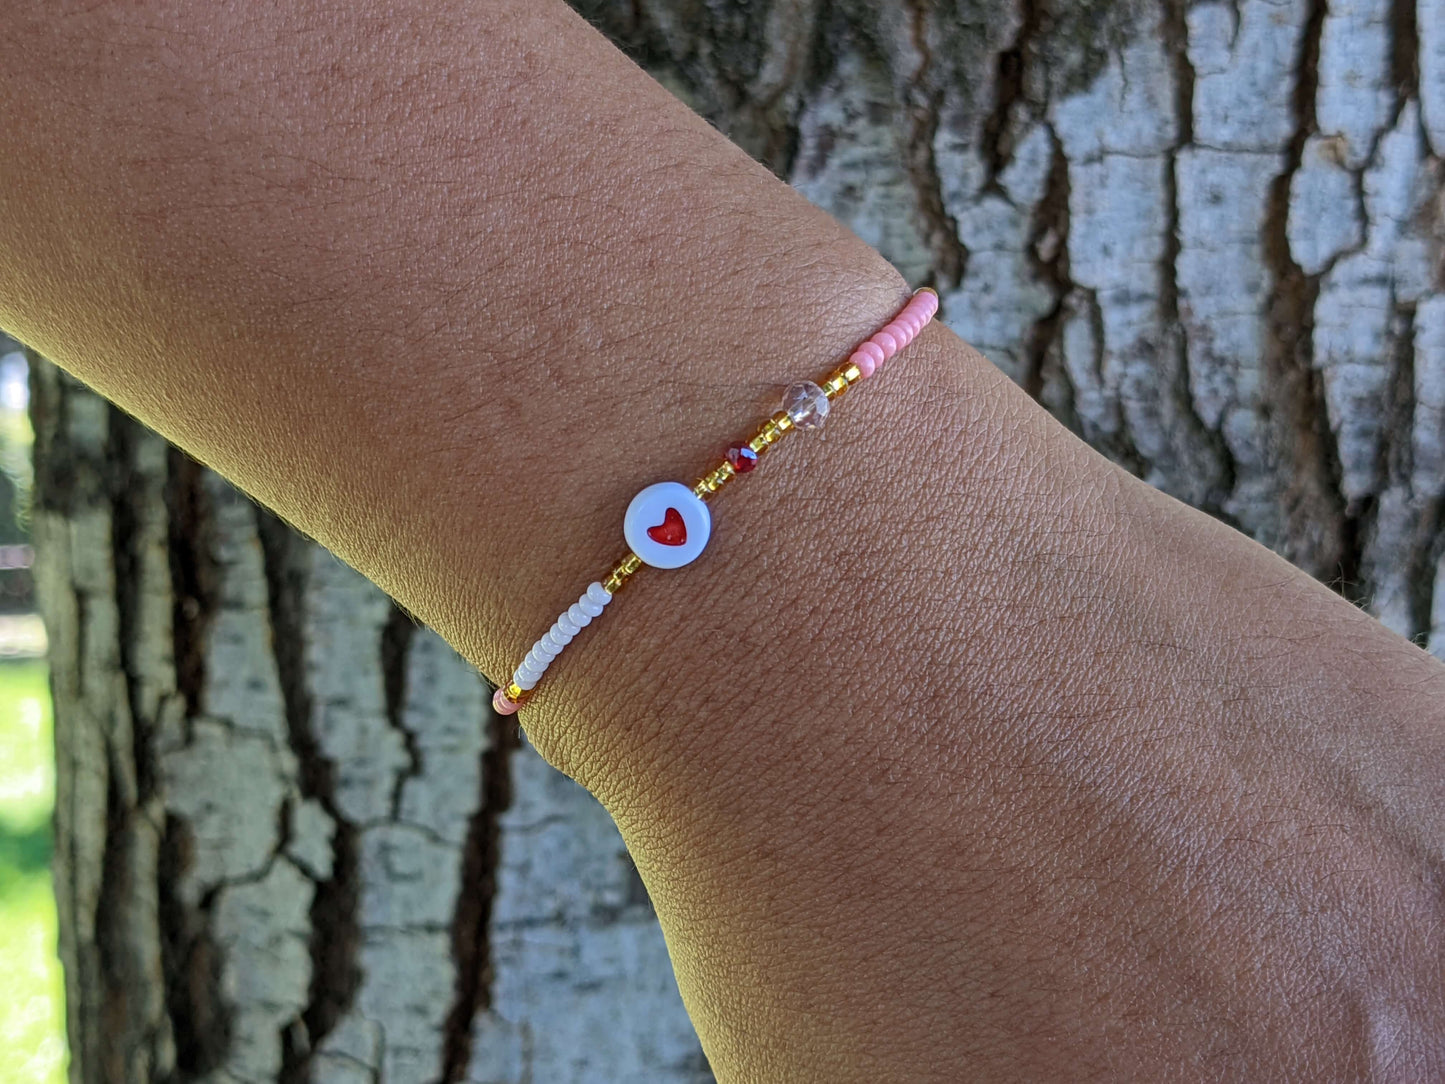 White with Red Heart with Pink & White Chaquira Bracelet